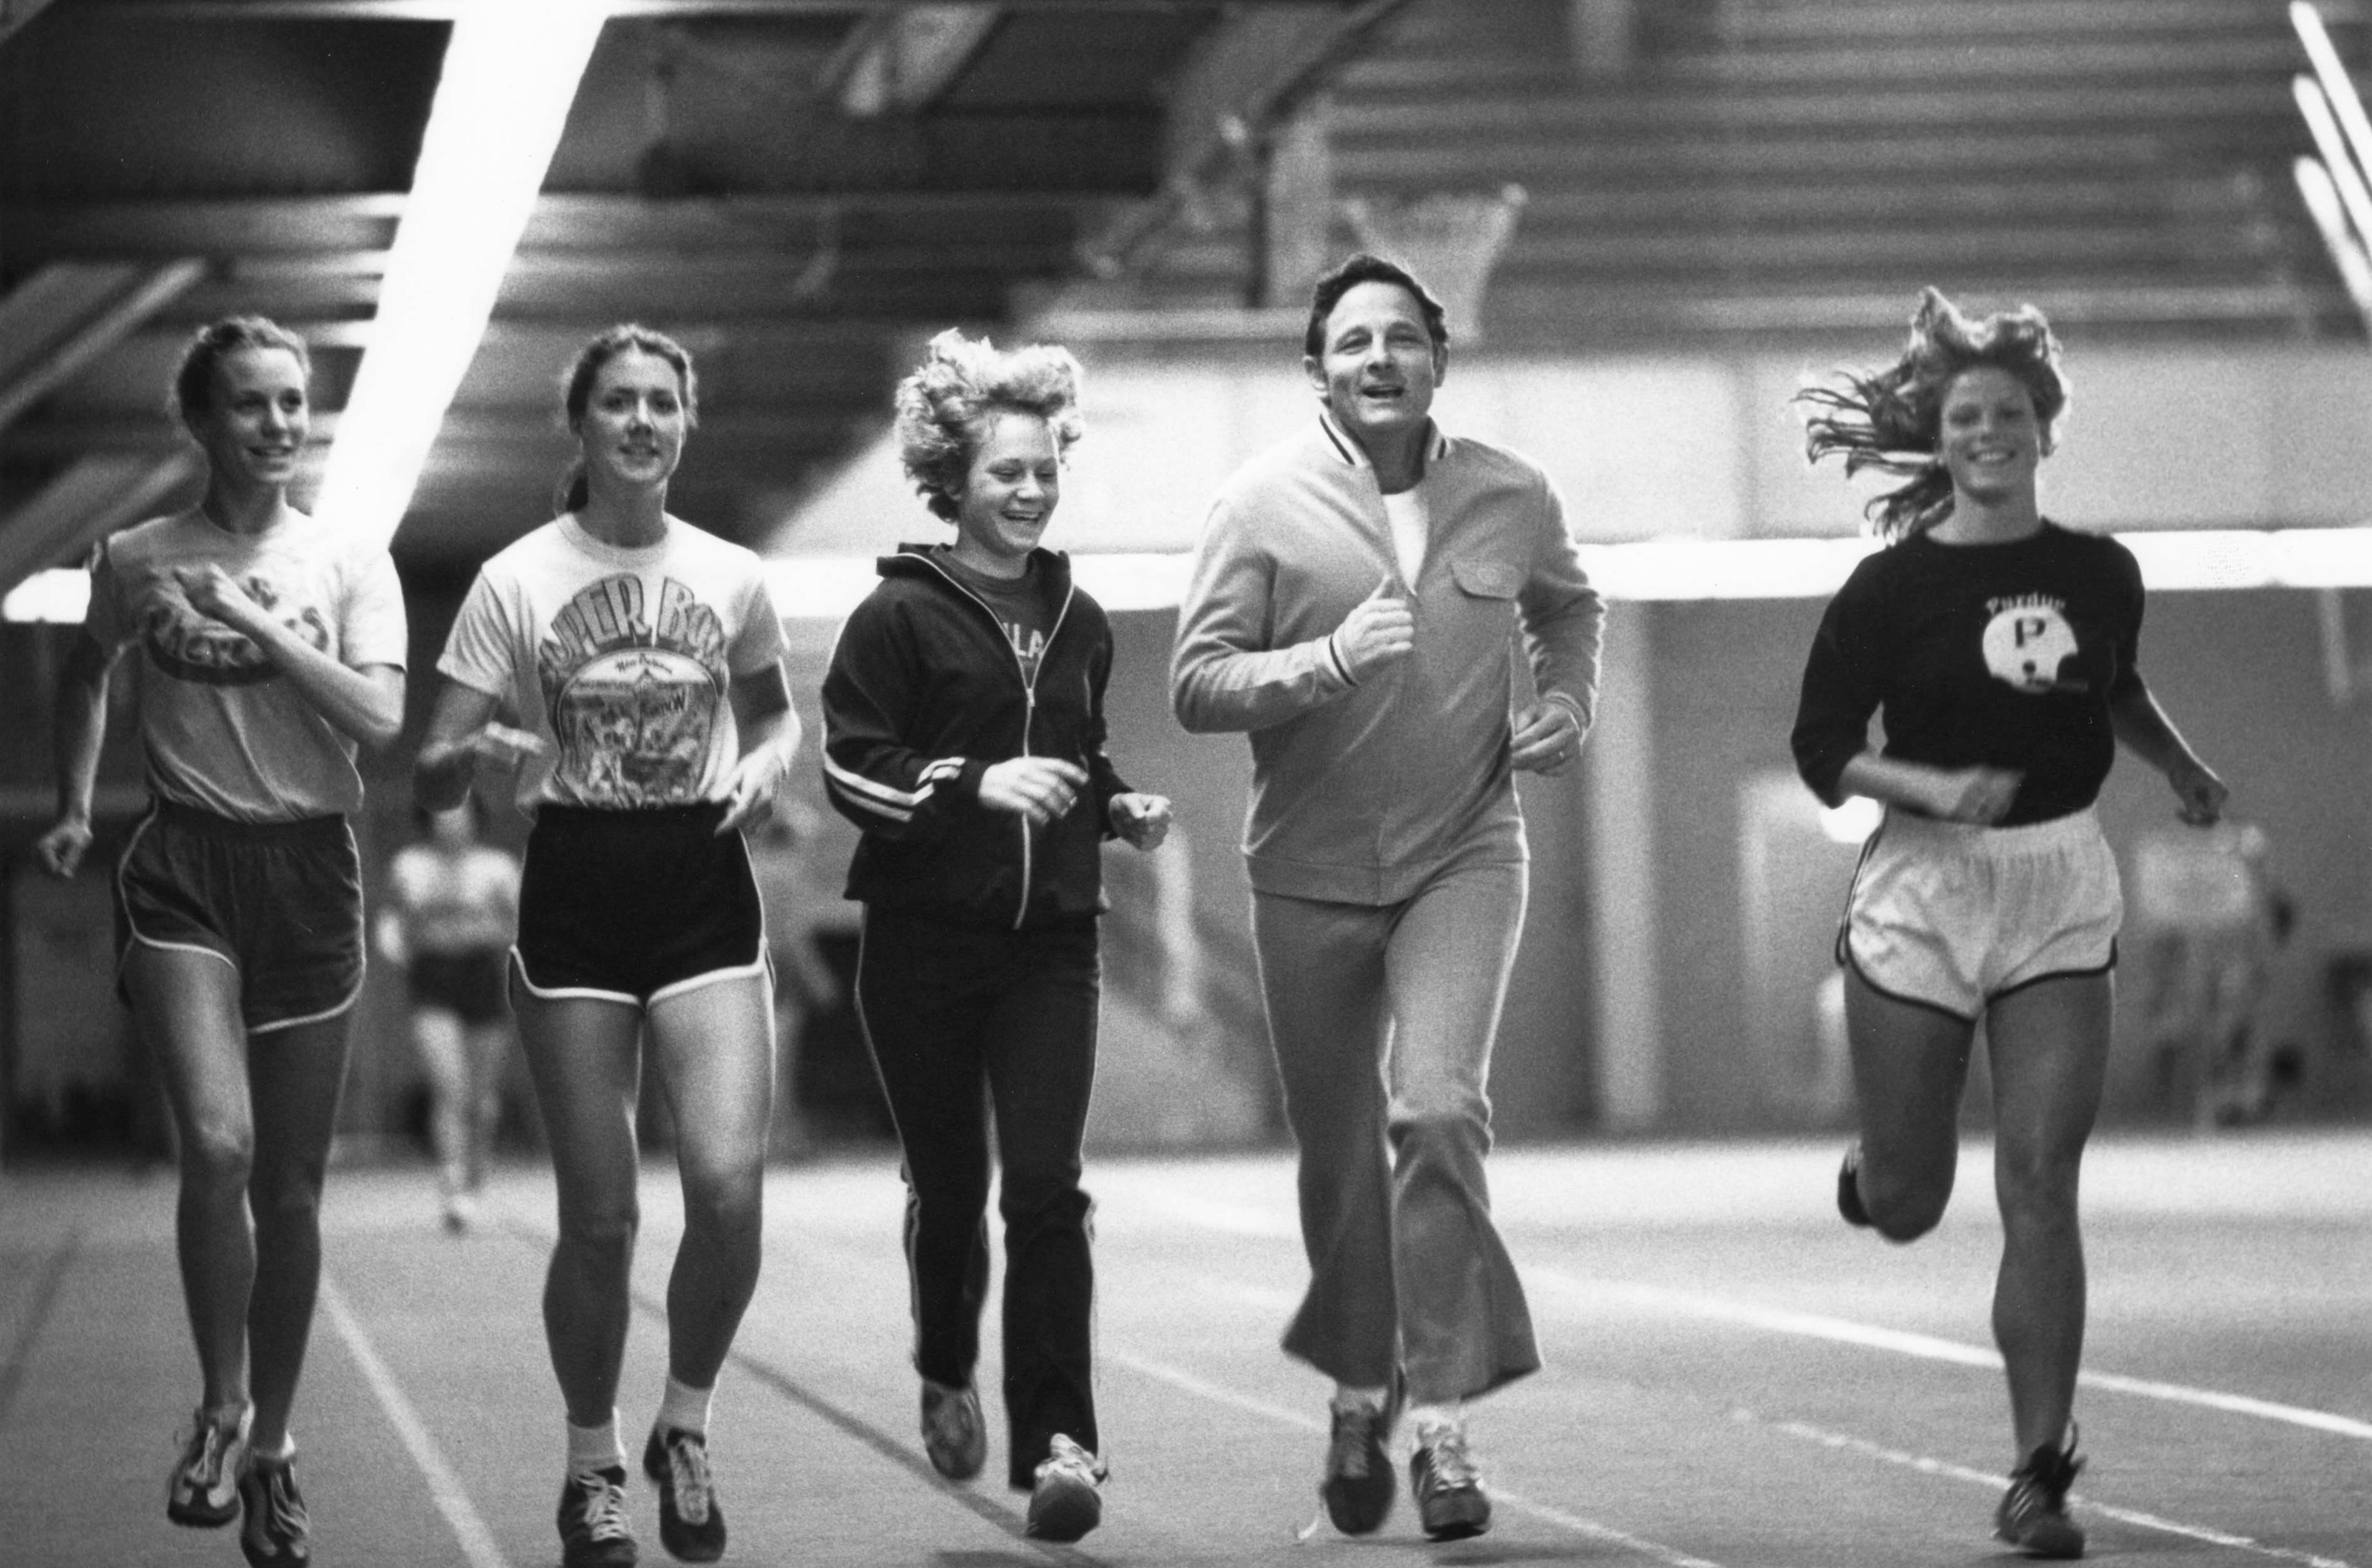 Senator Birch Bayh from Indiana exercises with Title IX athletes at Purdue University in the 1970s.